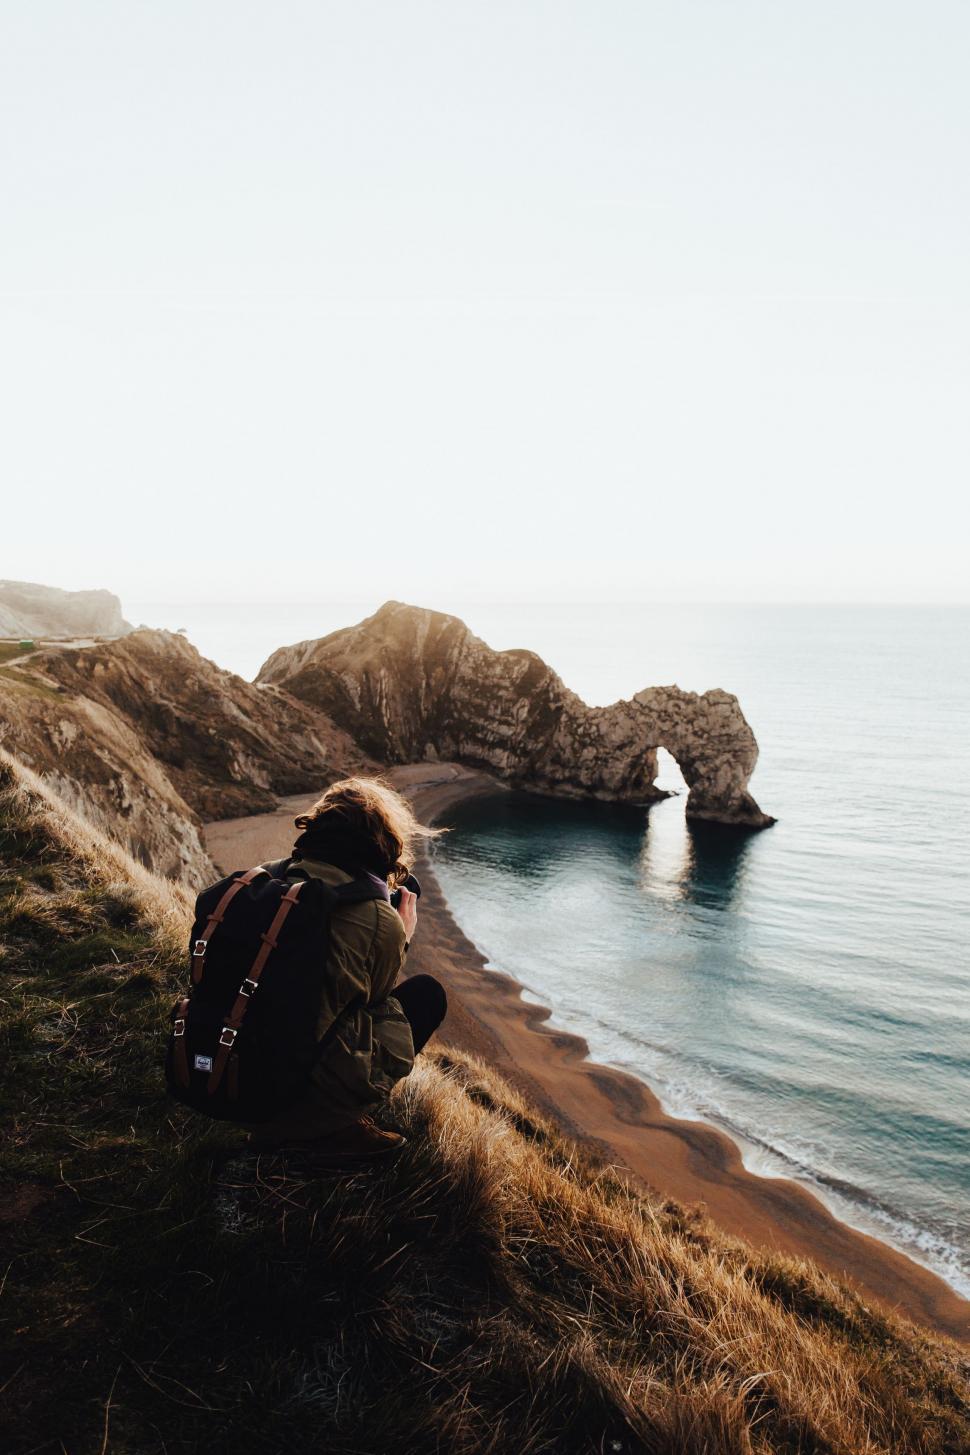 Free Image of Person Sitting on Cliff Overlooking Ocean 